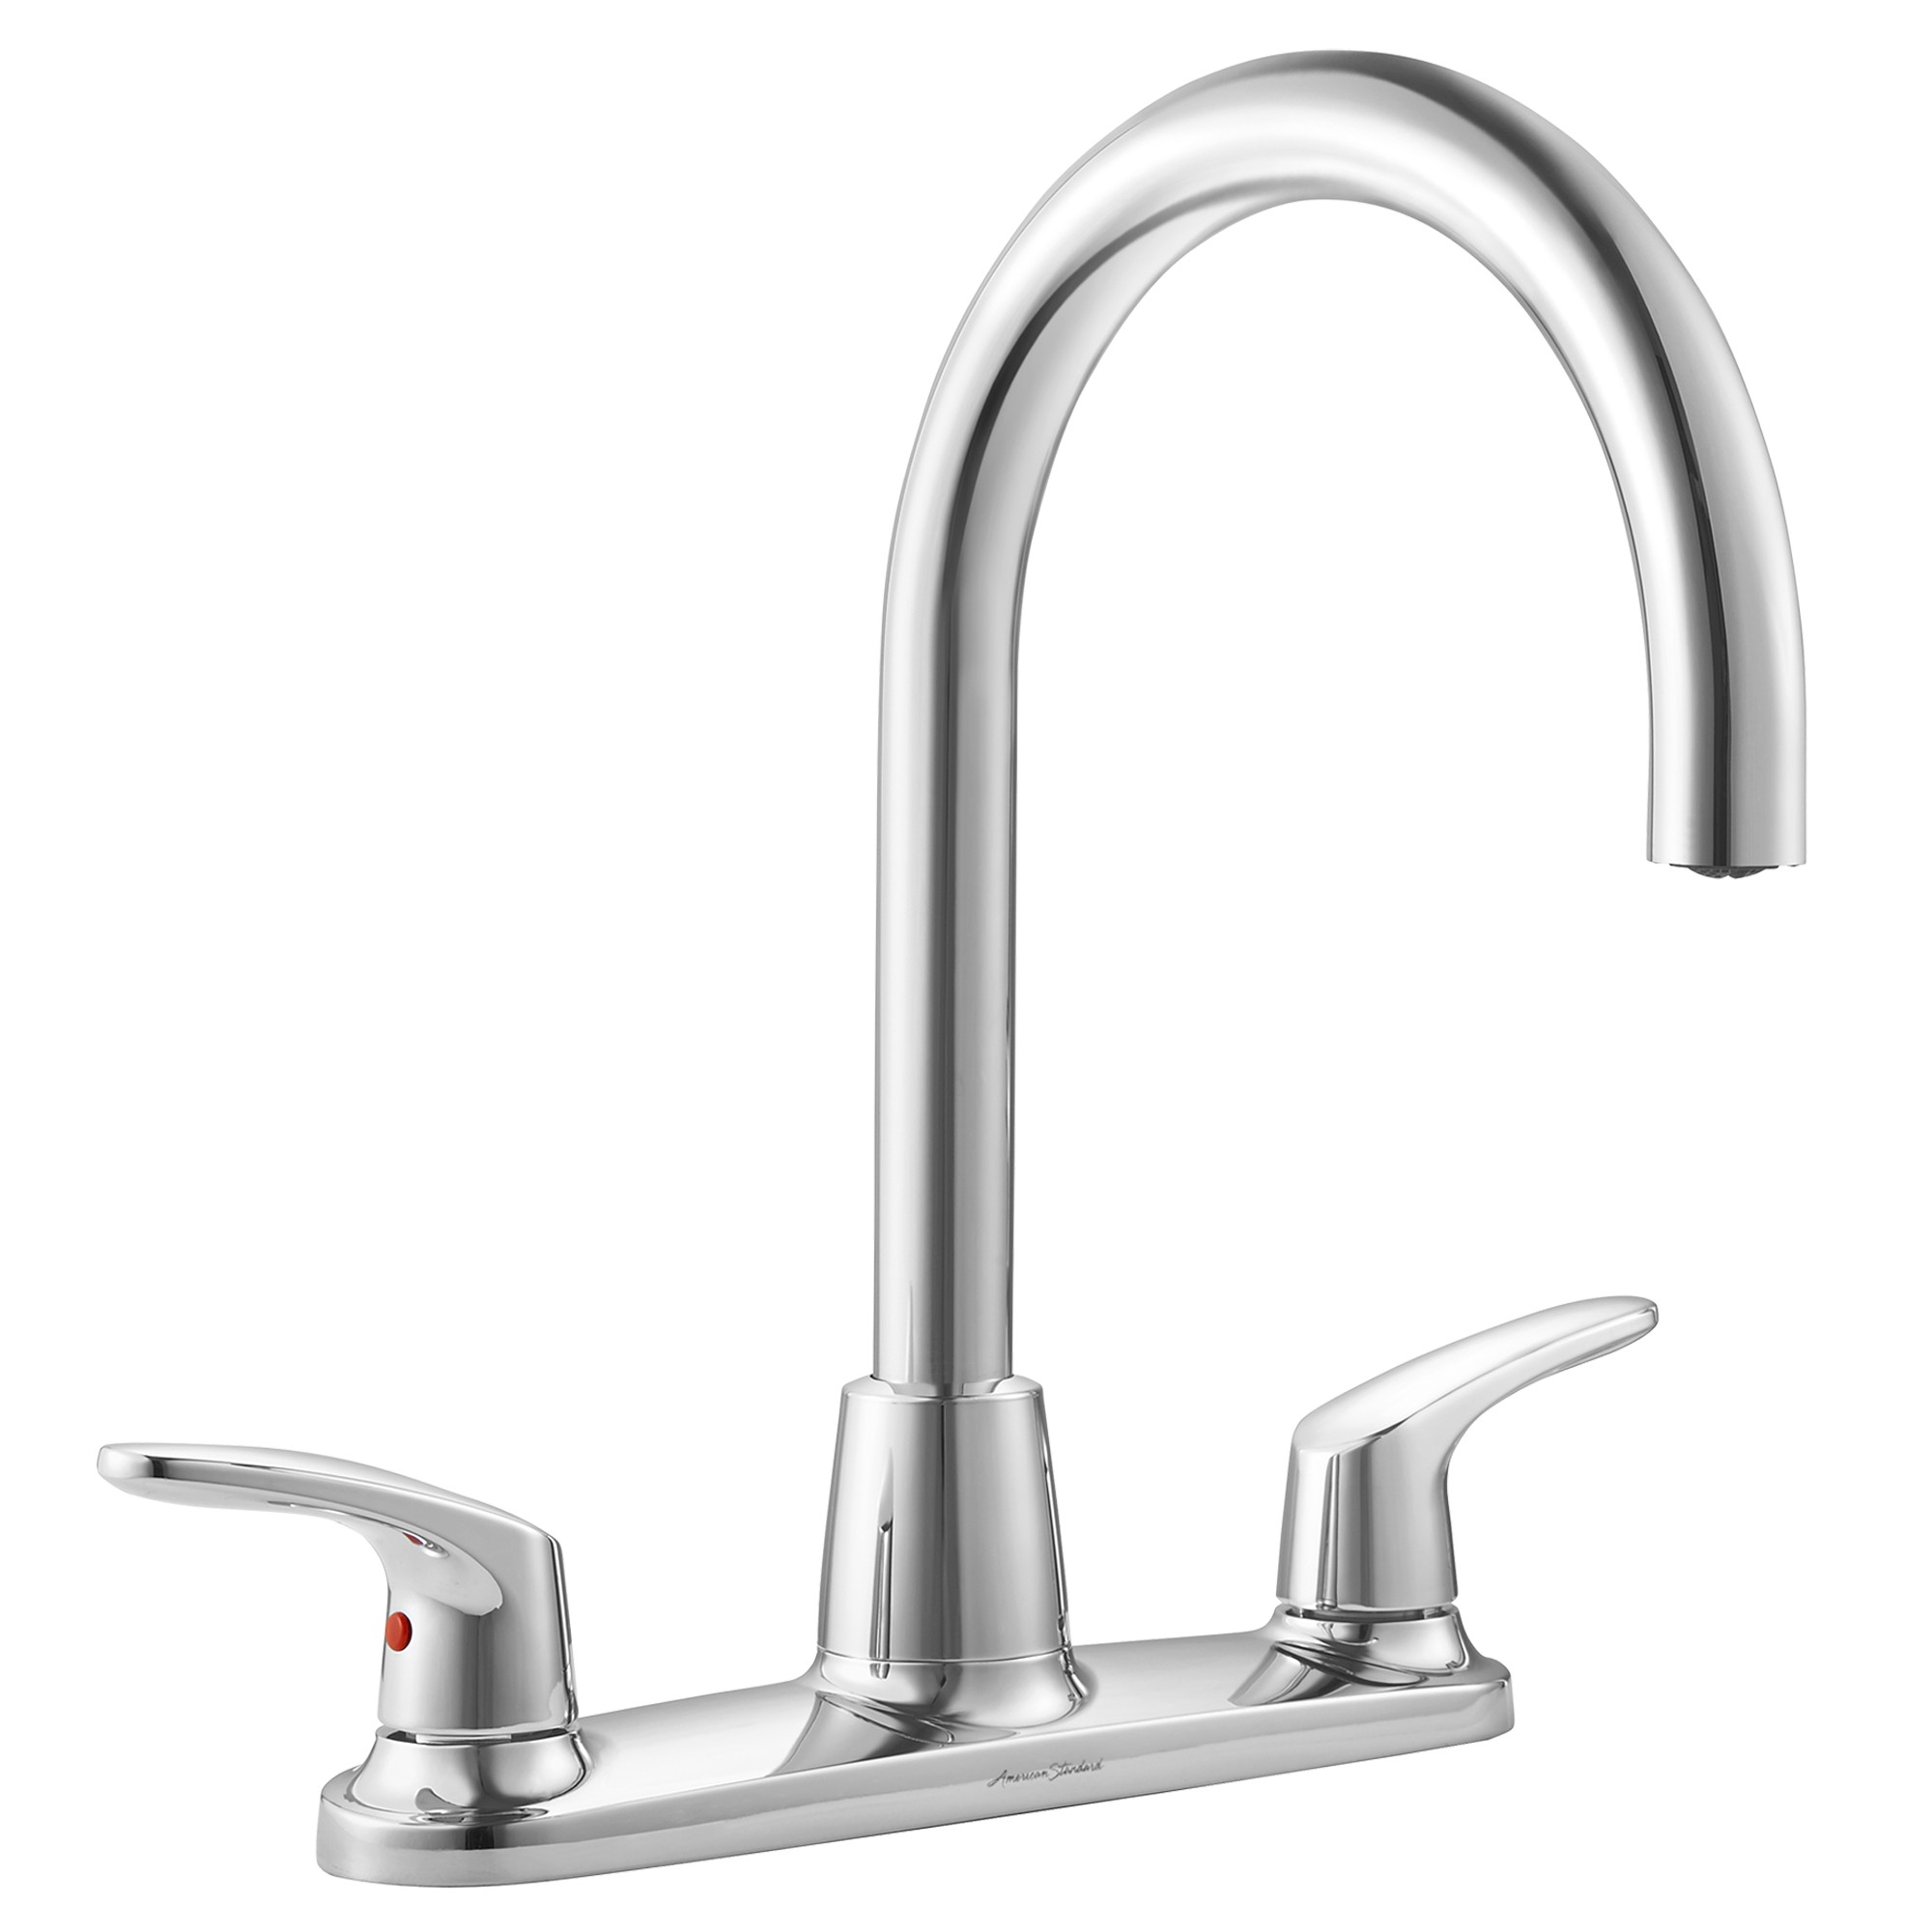 American Standard | 7074.550.002 | AMERICAN STANDARD 7074.550 COLONY PRO 2-HANDLE KITCHEN FAUCET CP POLISHED CHROME